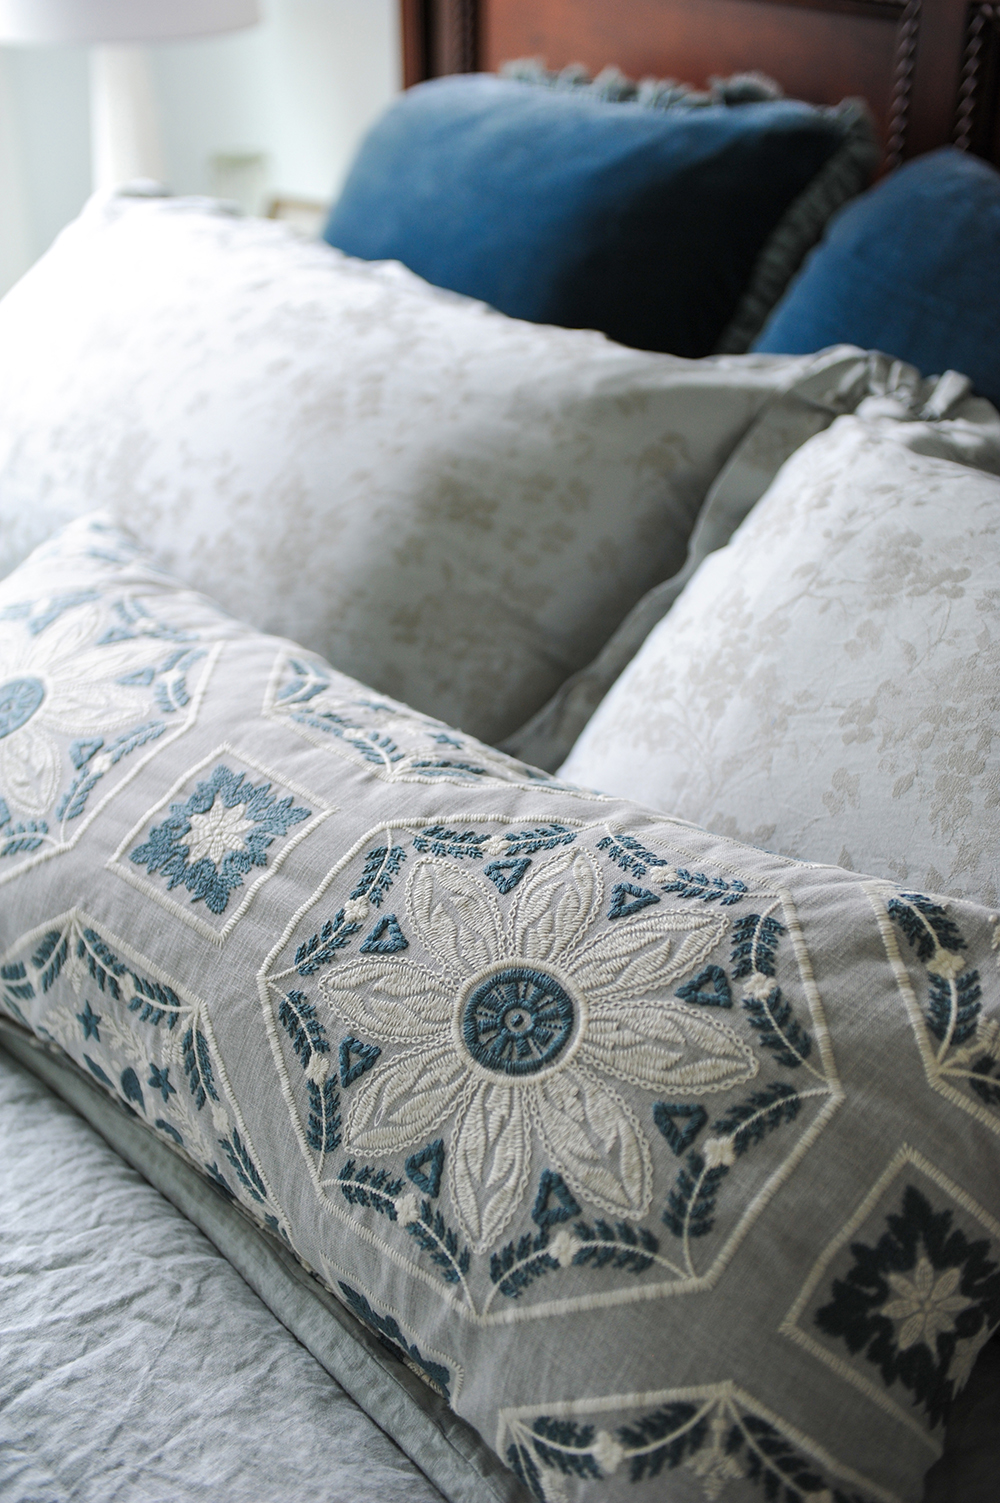 Splurge alert: this Italian bedding was an over-the-top indulgence worth every penny.